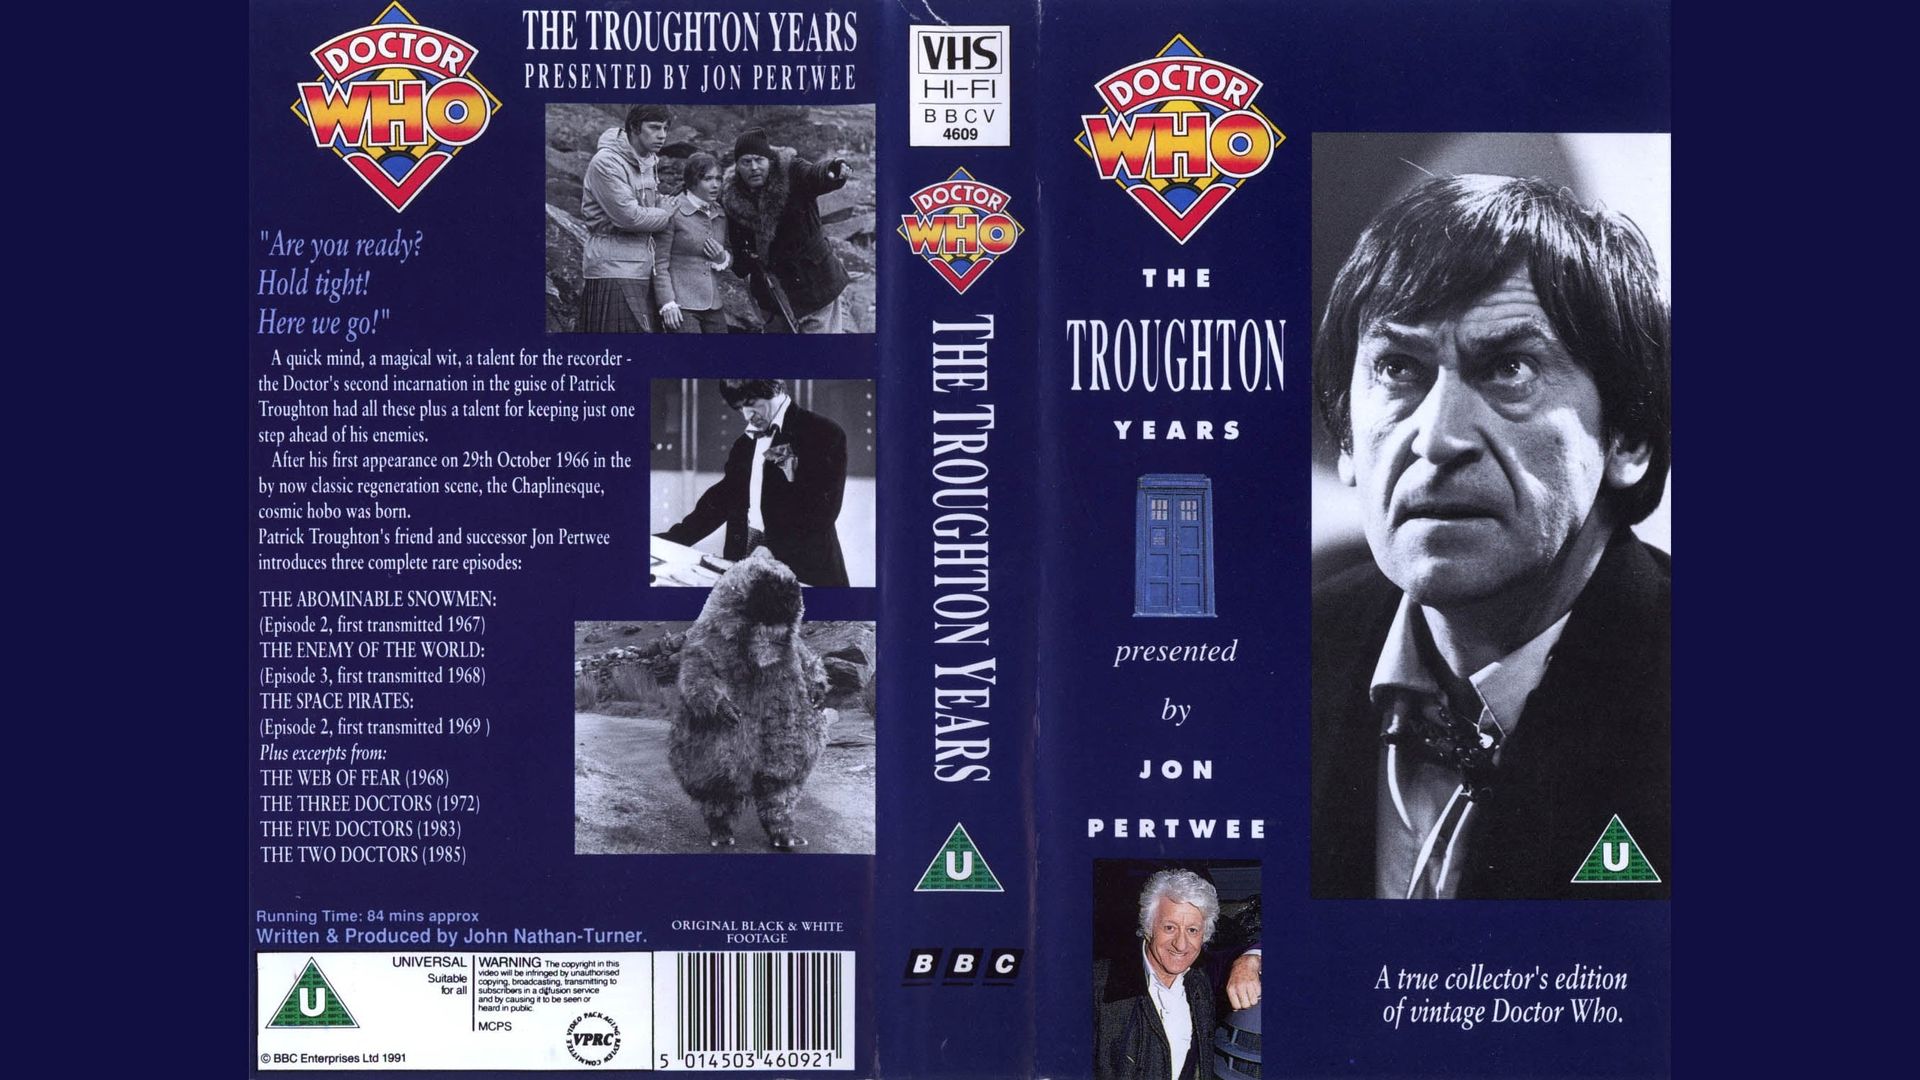 Doctor Who: The Troughton Years background